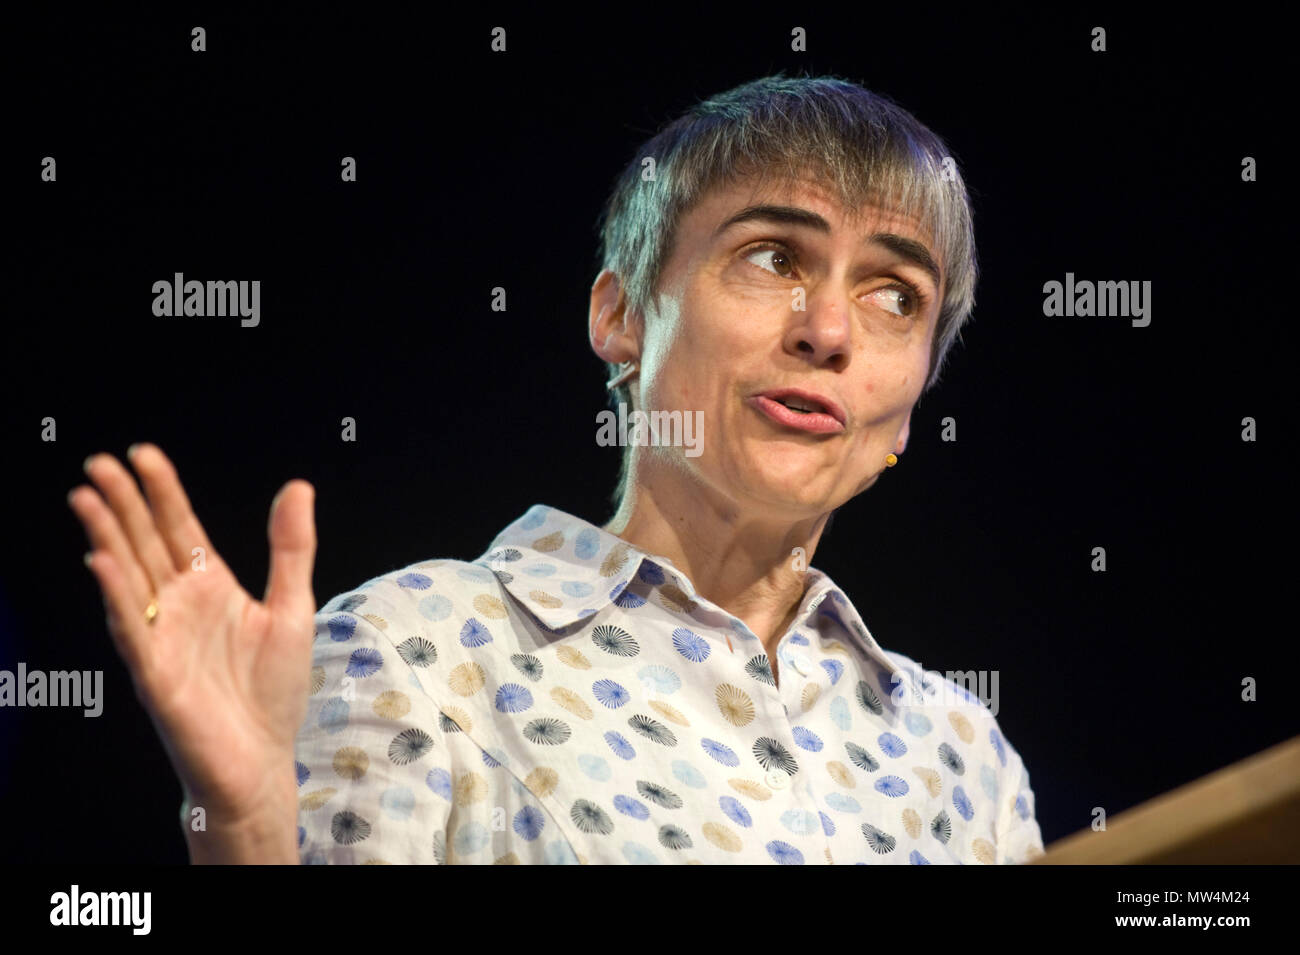 Dame Ottoline Leyser DBE FRS British plant biologist & Professor of Plant Development at University of Cambridge also director of the Sainsbury Laboratory, Cambridge speaking on stage at Hay Festival 2018 Hay-on-Wye Powys Wales UK Stock Photo